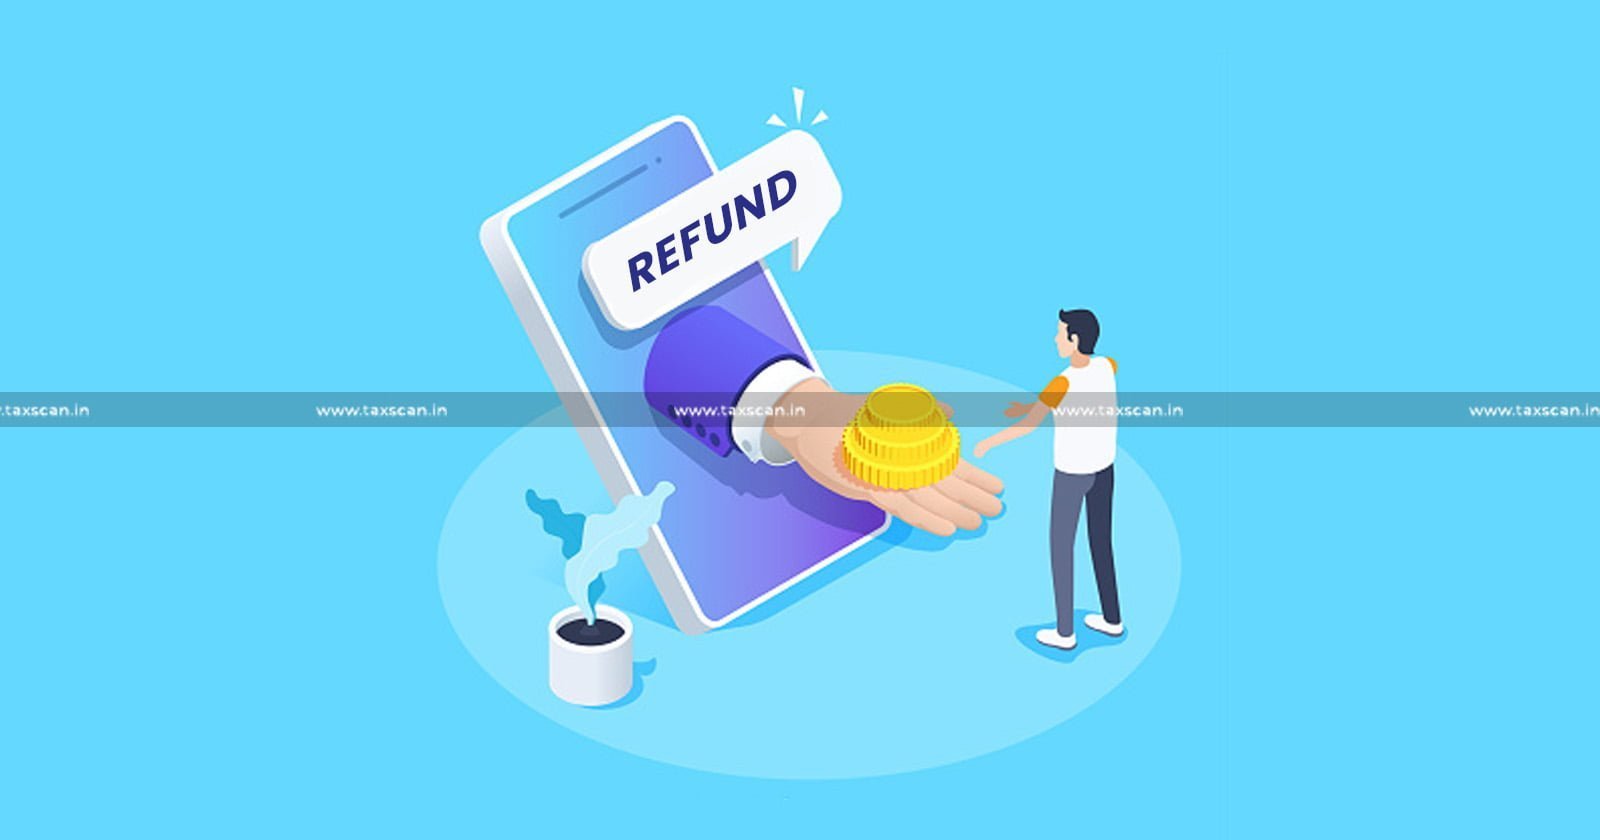 Sanctioned Refund Claim can be Adjusted to Any Dues of Excise Duty - Refund Claim - Dues of Excise Duty - Excise Duty - Central Excise Act - CESTAT - Taxscan